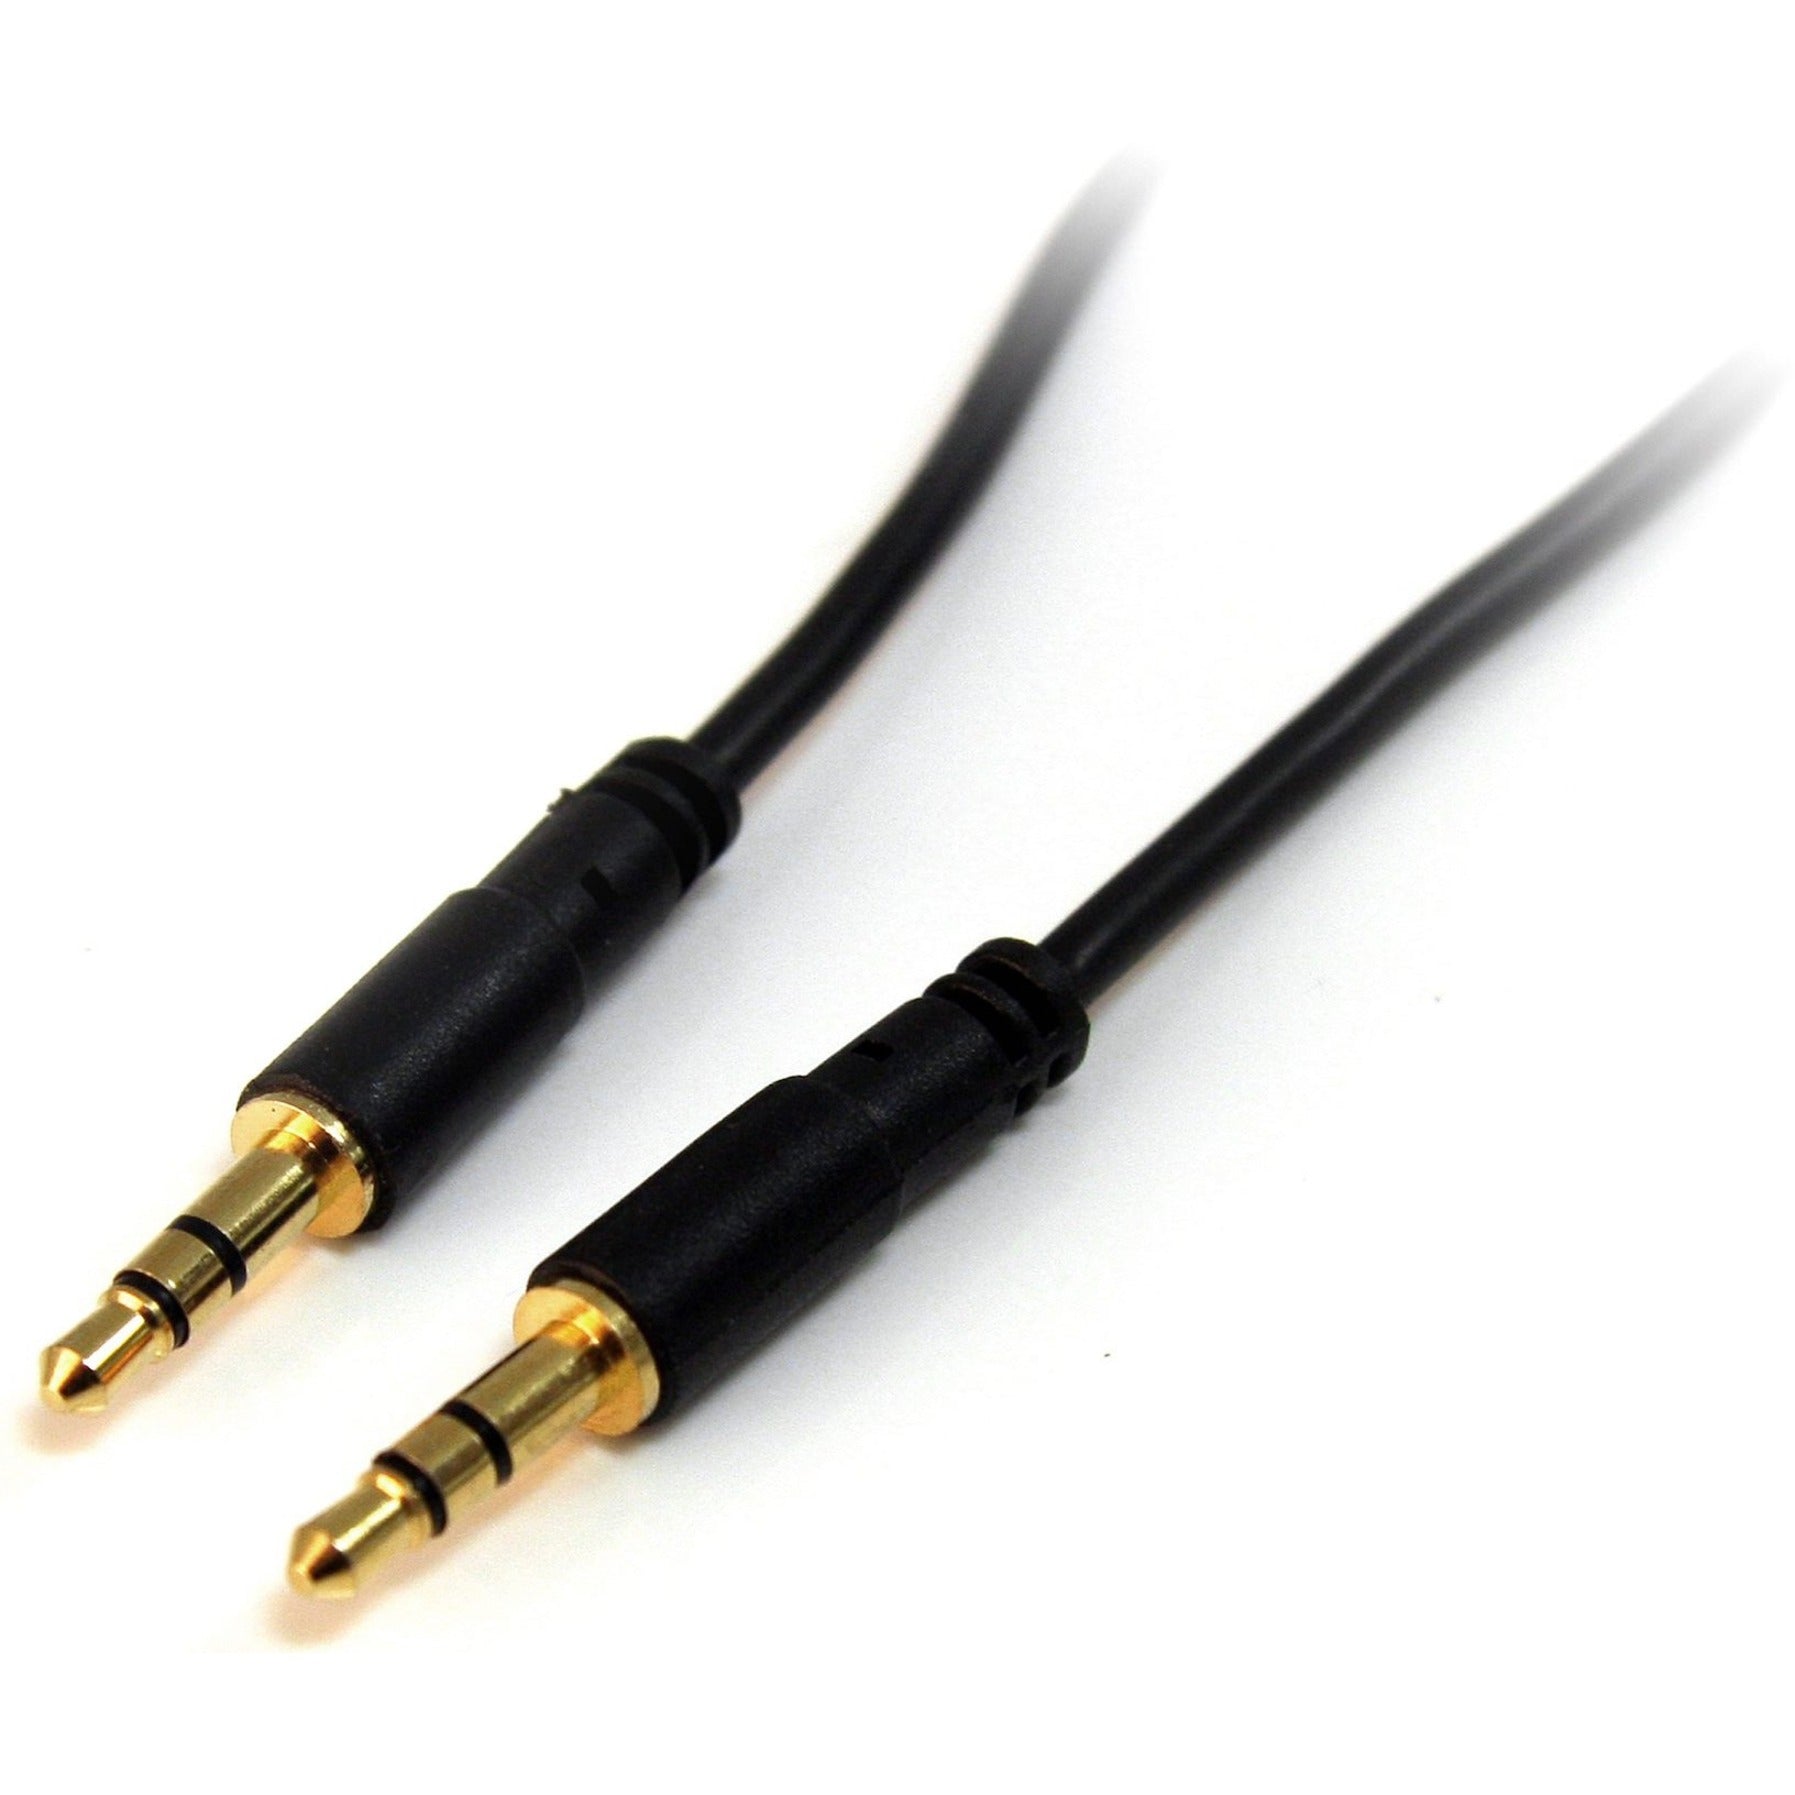 StarTech.com MU6MMS 6 ft Slim 3.5mm Stereo Audio Cable, Molded, Gold Plated, for iPhone, iPod, iPad, MP3 Player, Headphone